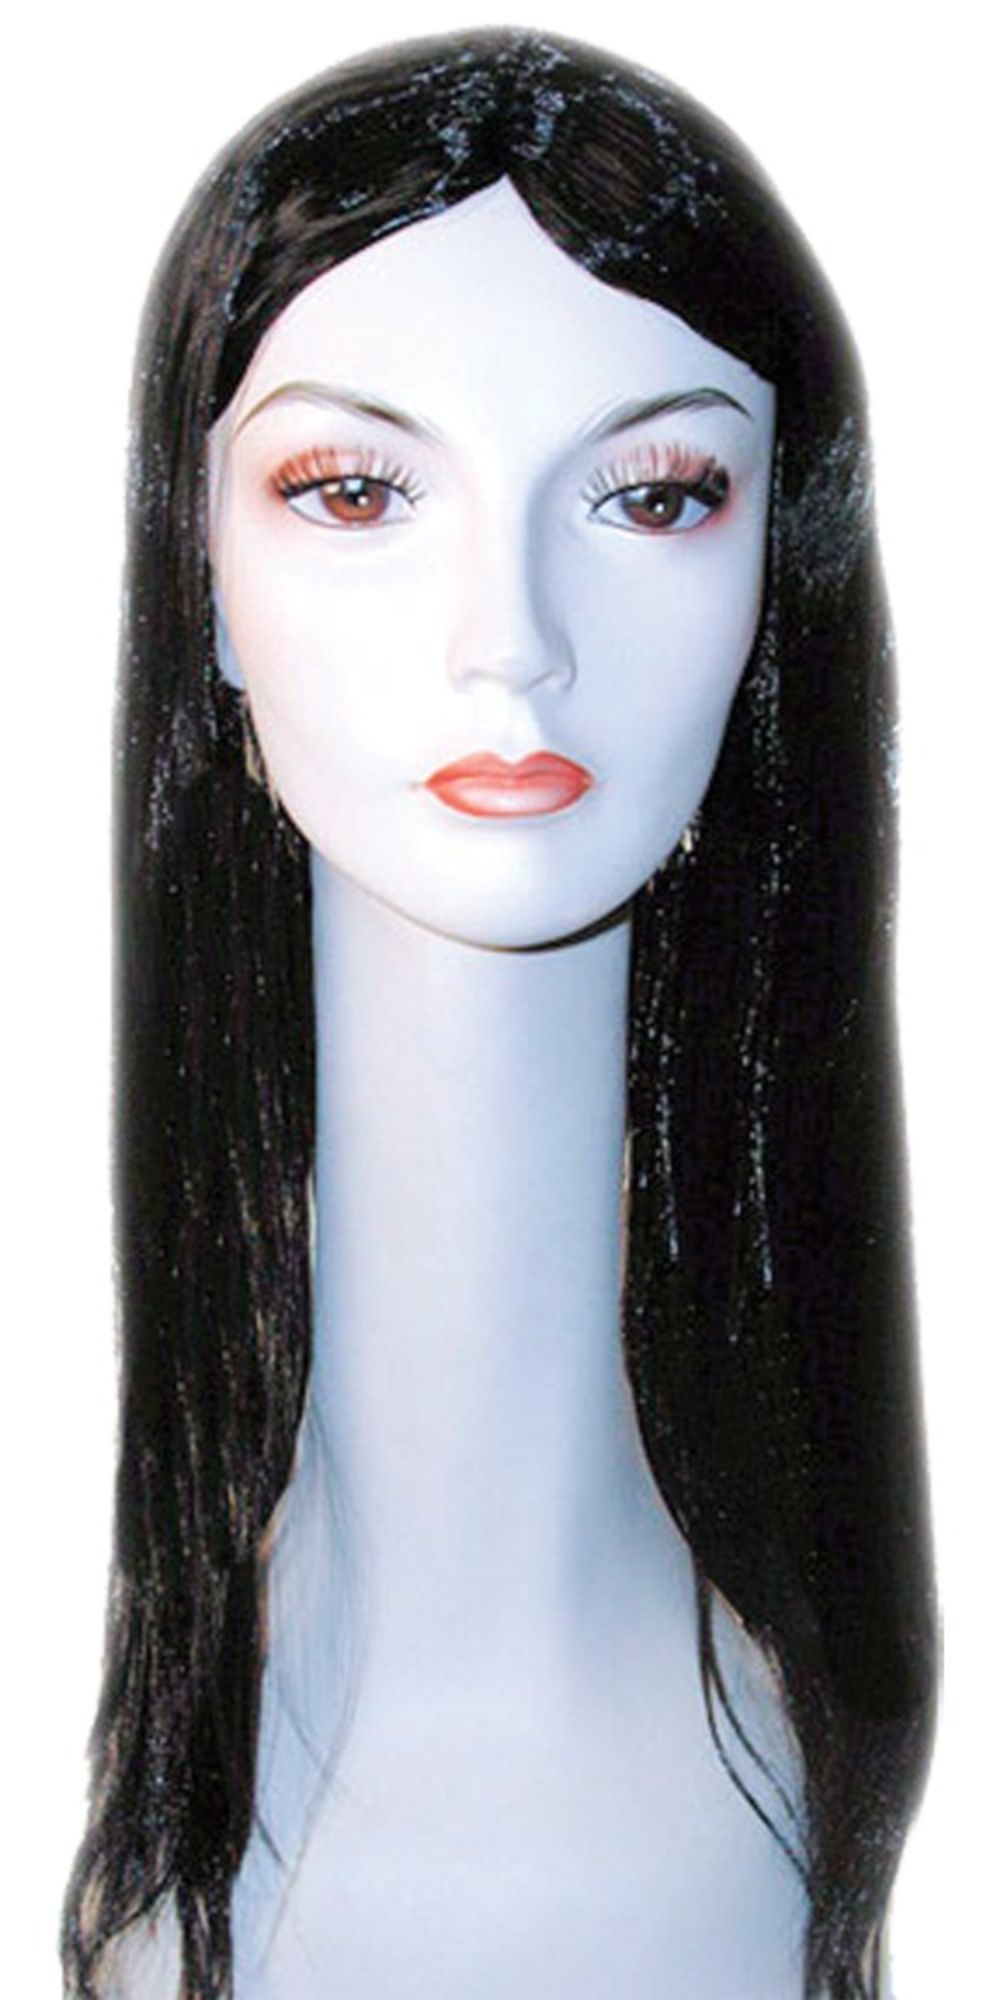 The Costume Center 22" Auburn Witch Women Adult Halloween Wig Costume Accessory